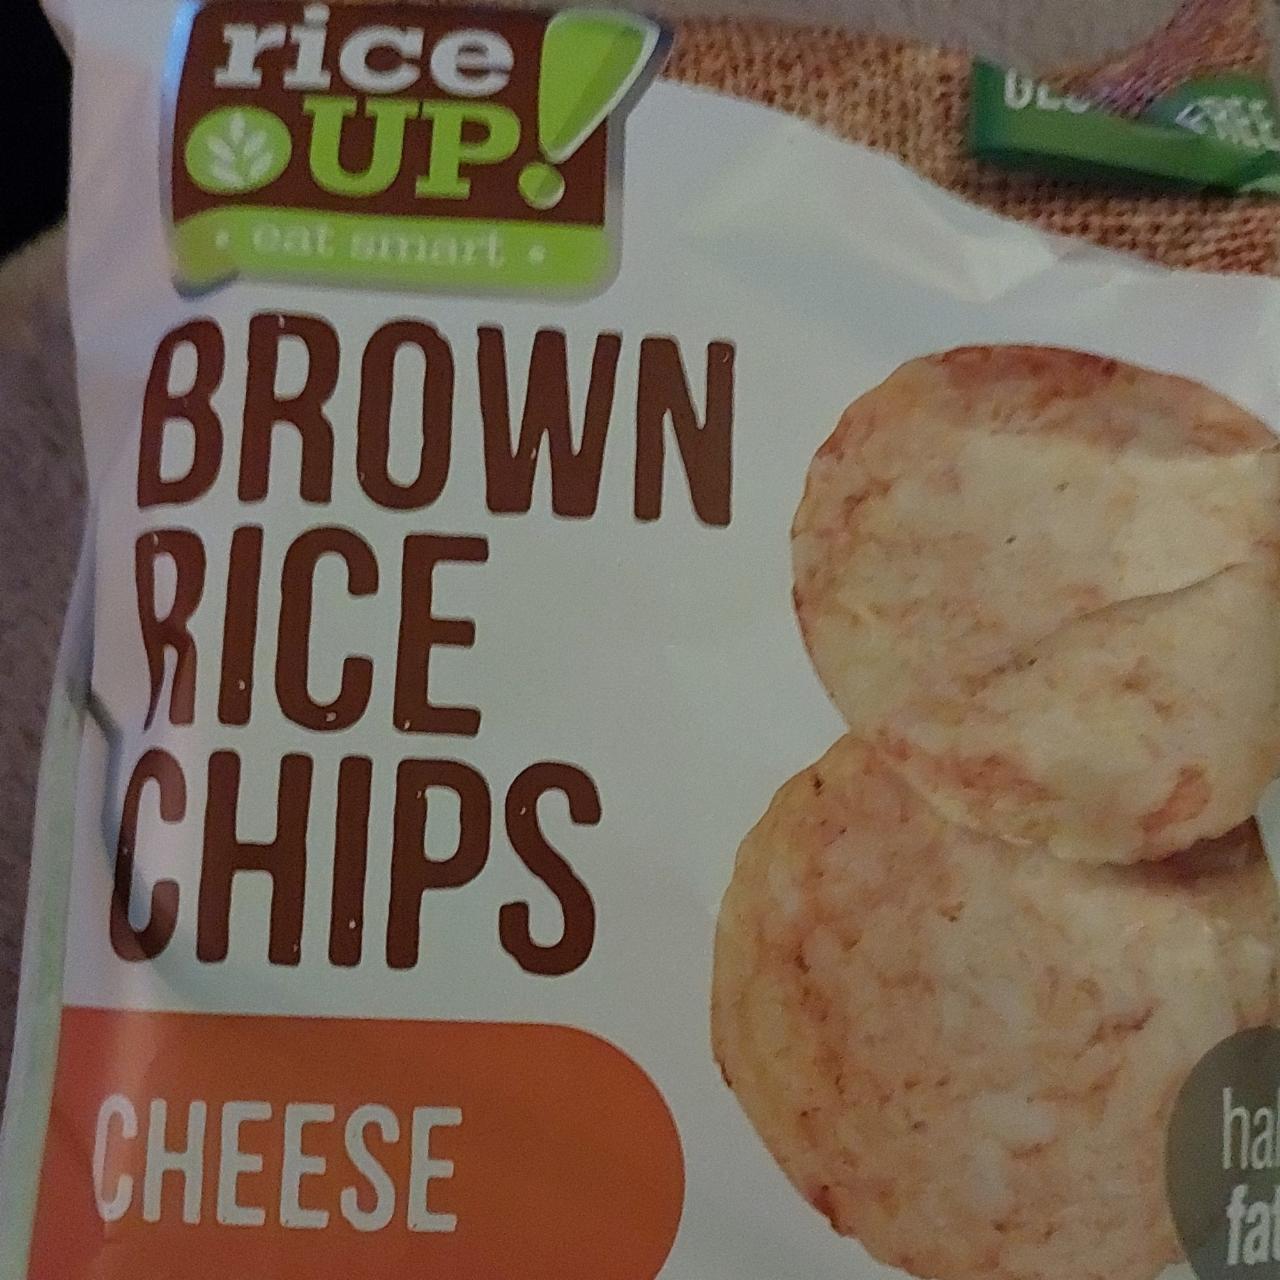 Zdjęcia - Brown Rice Chips Cheese Rice up!